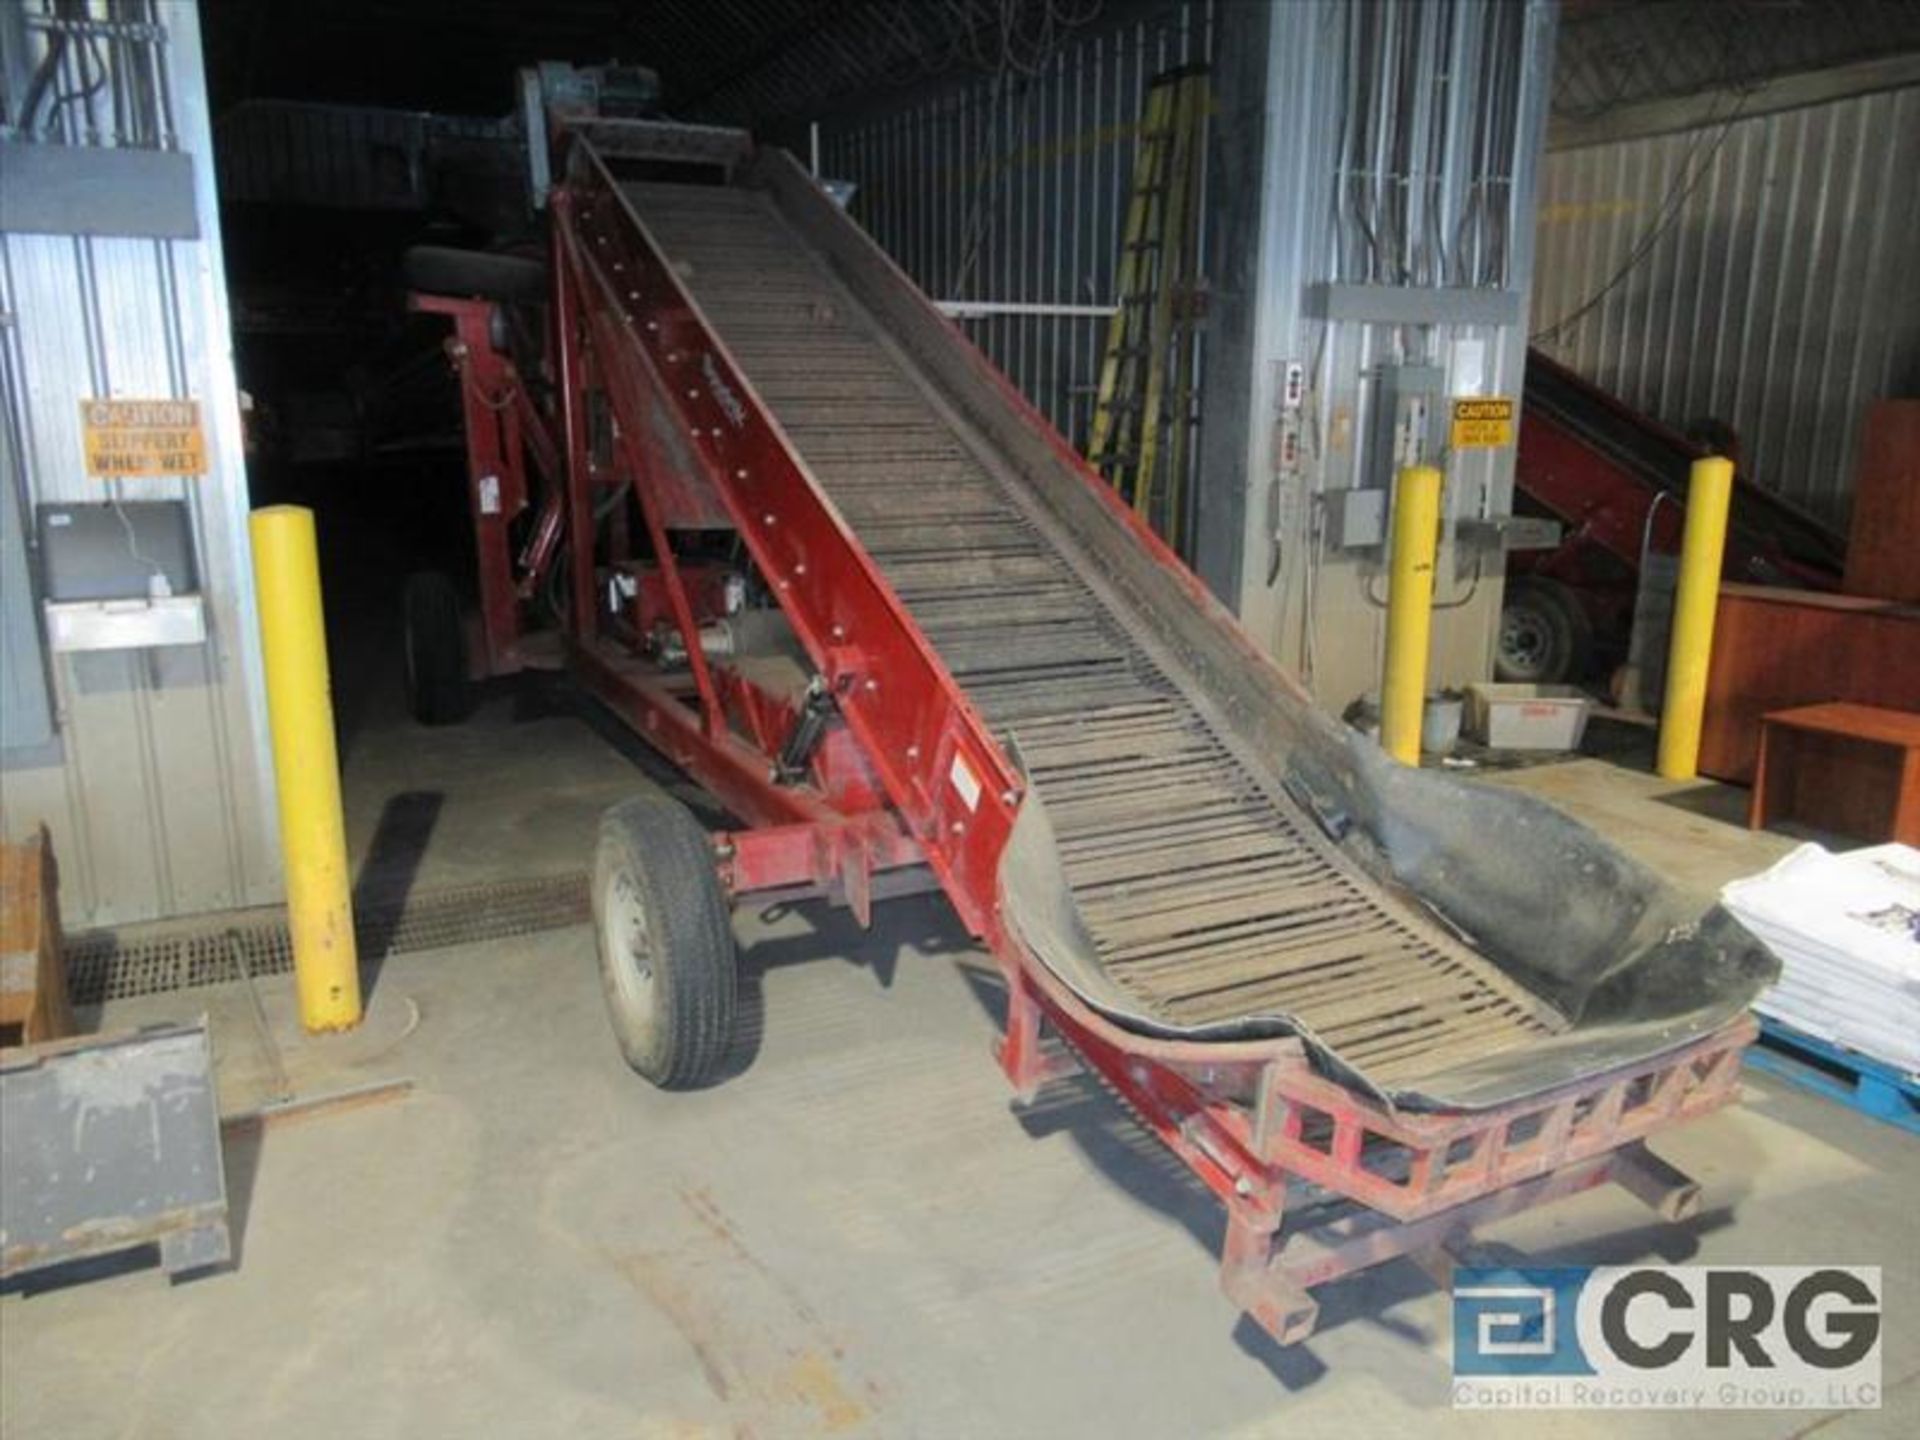 Spudnik 560 potato piler #1, 36 in. wide x 48 ft. long, hydraulic and electric powered, s/n 233 [